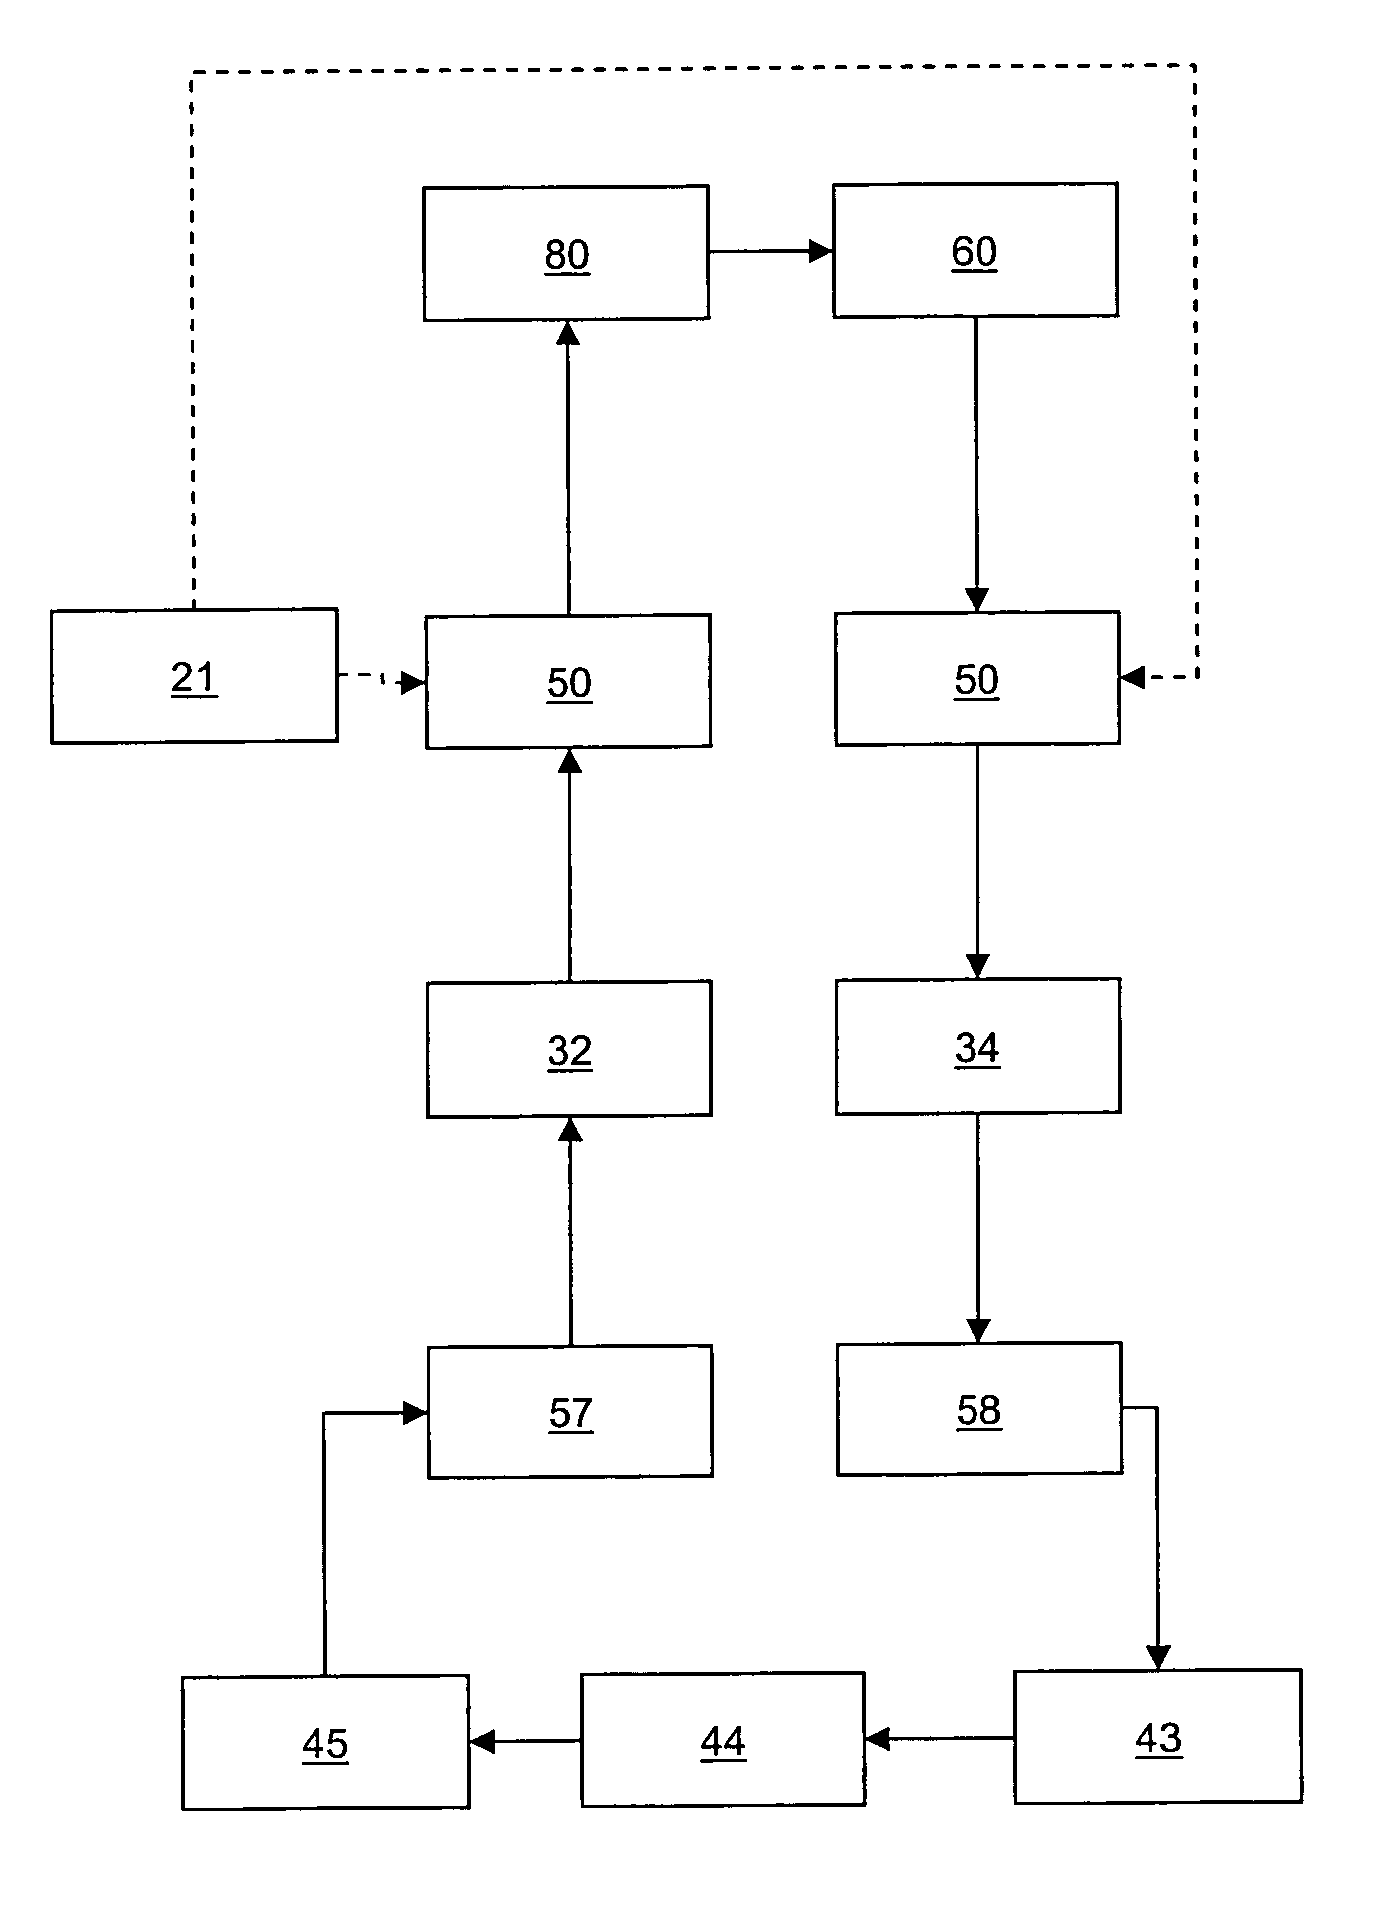 Method of reducing fluid emissions from a global spray cooling system